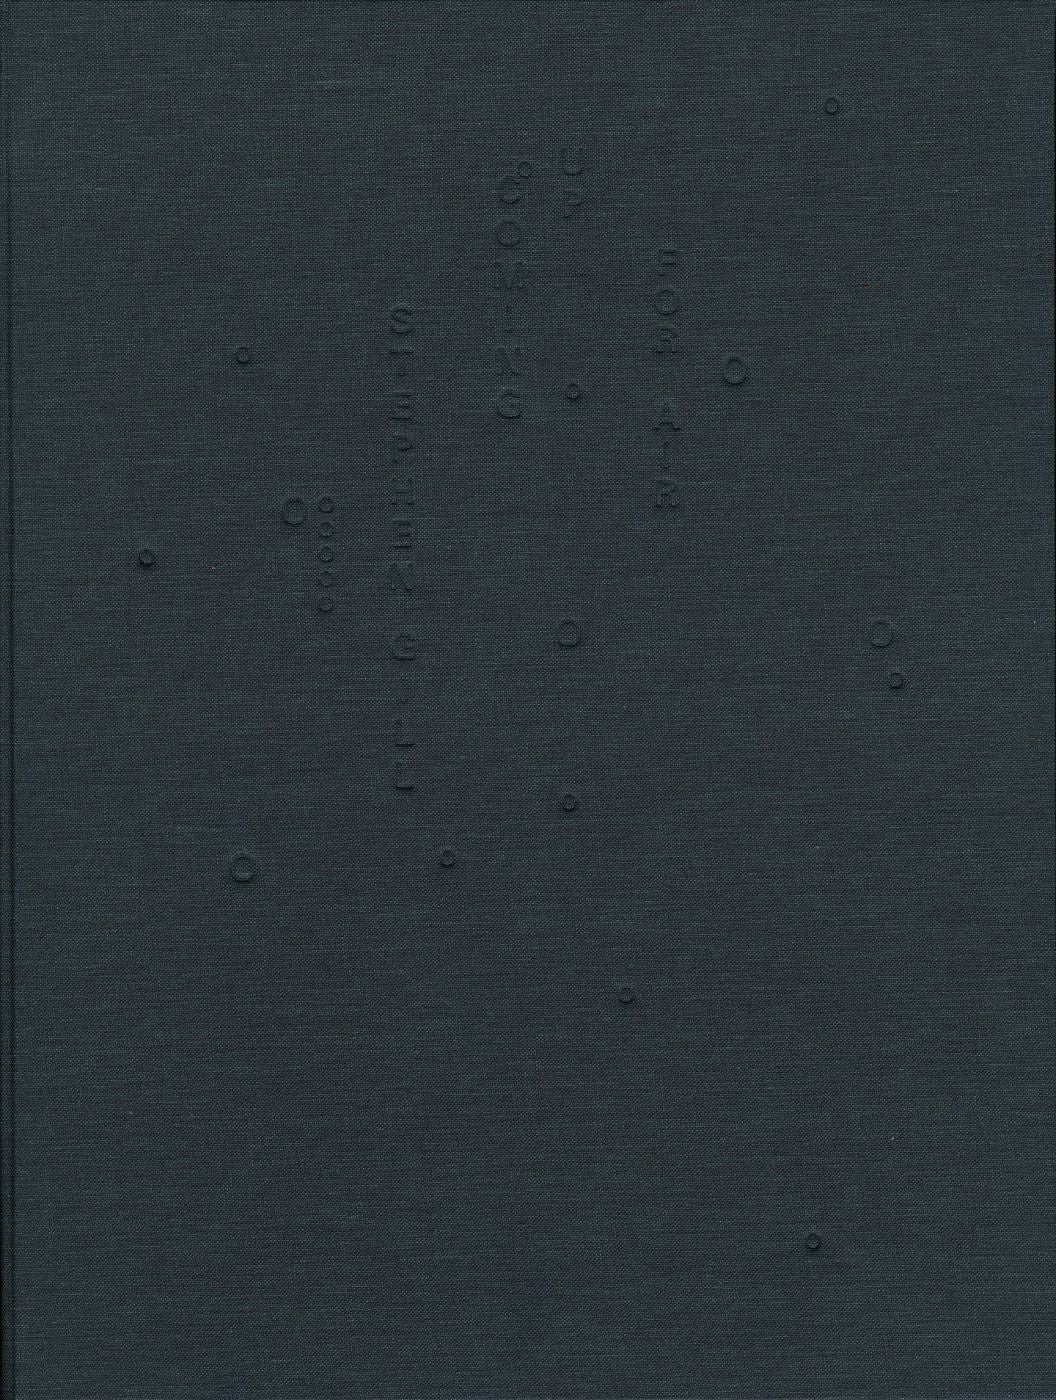 Stephen Gill: Coming Up for Air and B-Sides (Two Volumes), Limited Editions (with 2 Prints) [SIGNED]